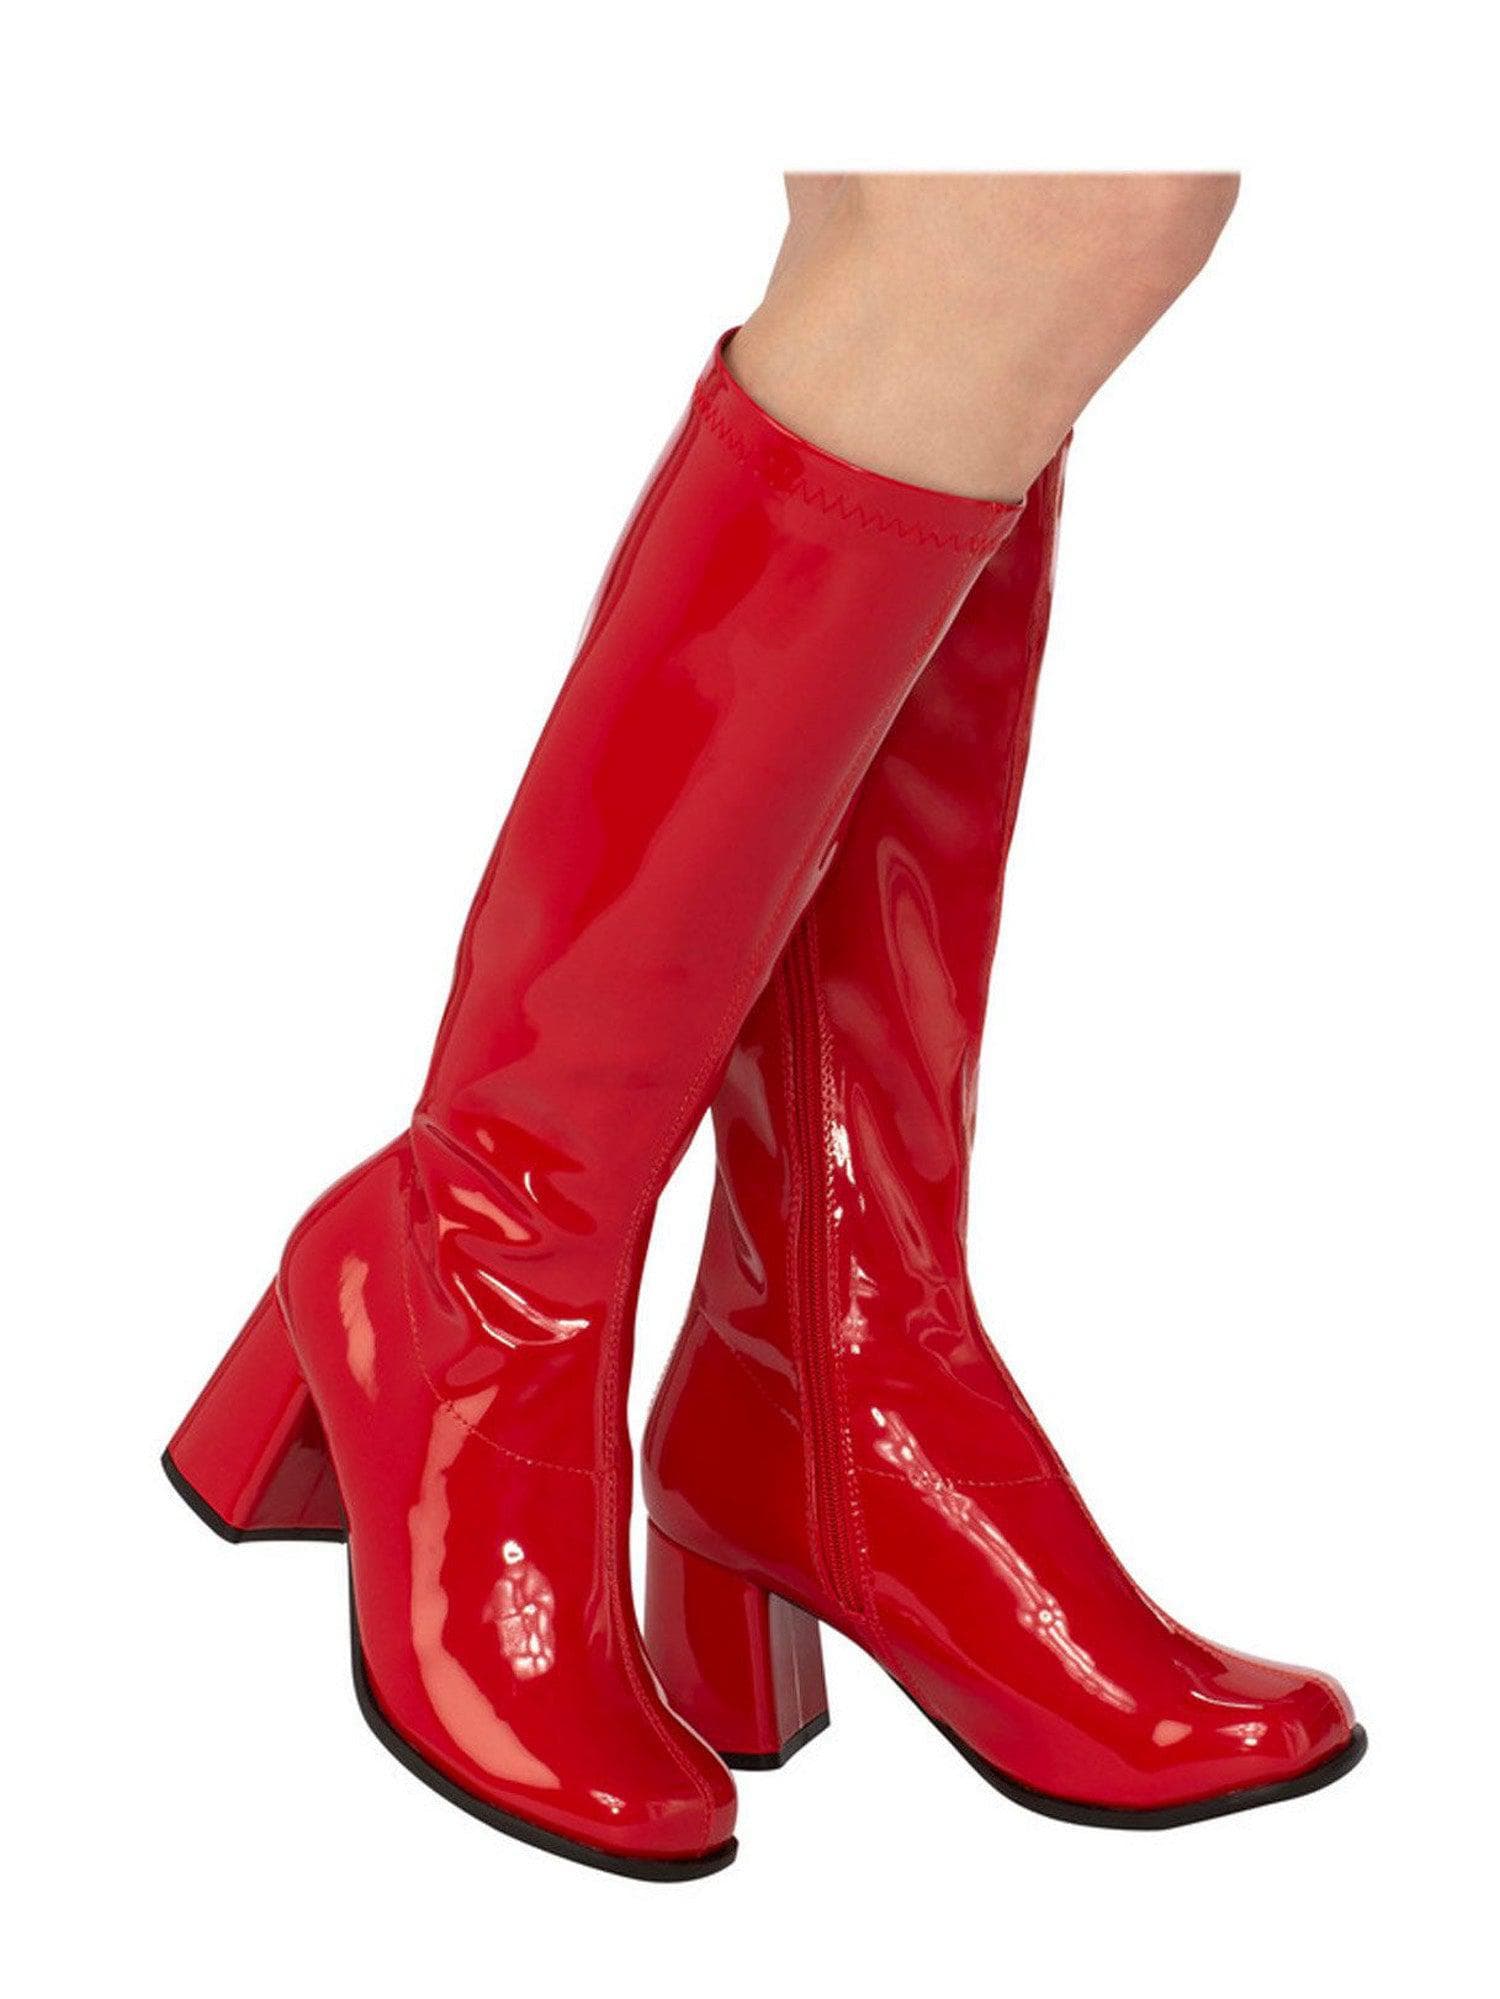 Adult Red Patent Go Go Disco Boots - costumes.com